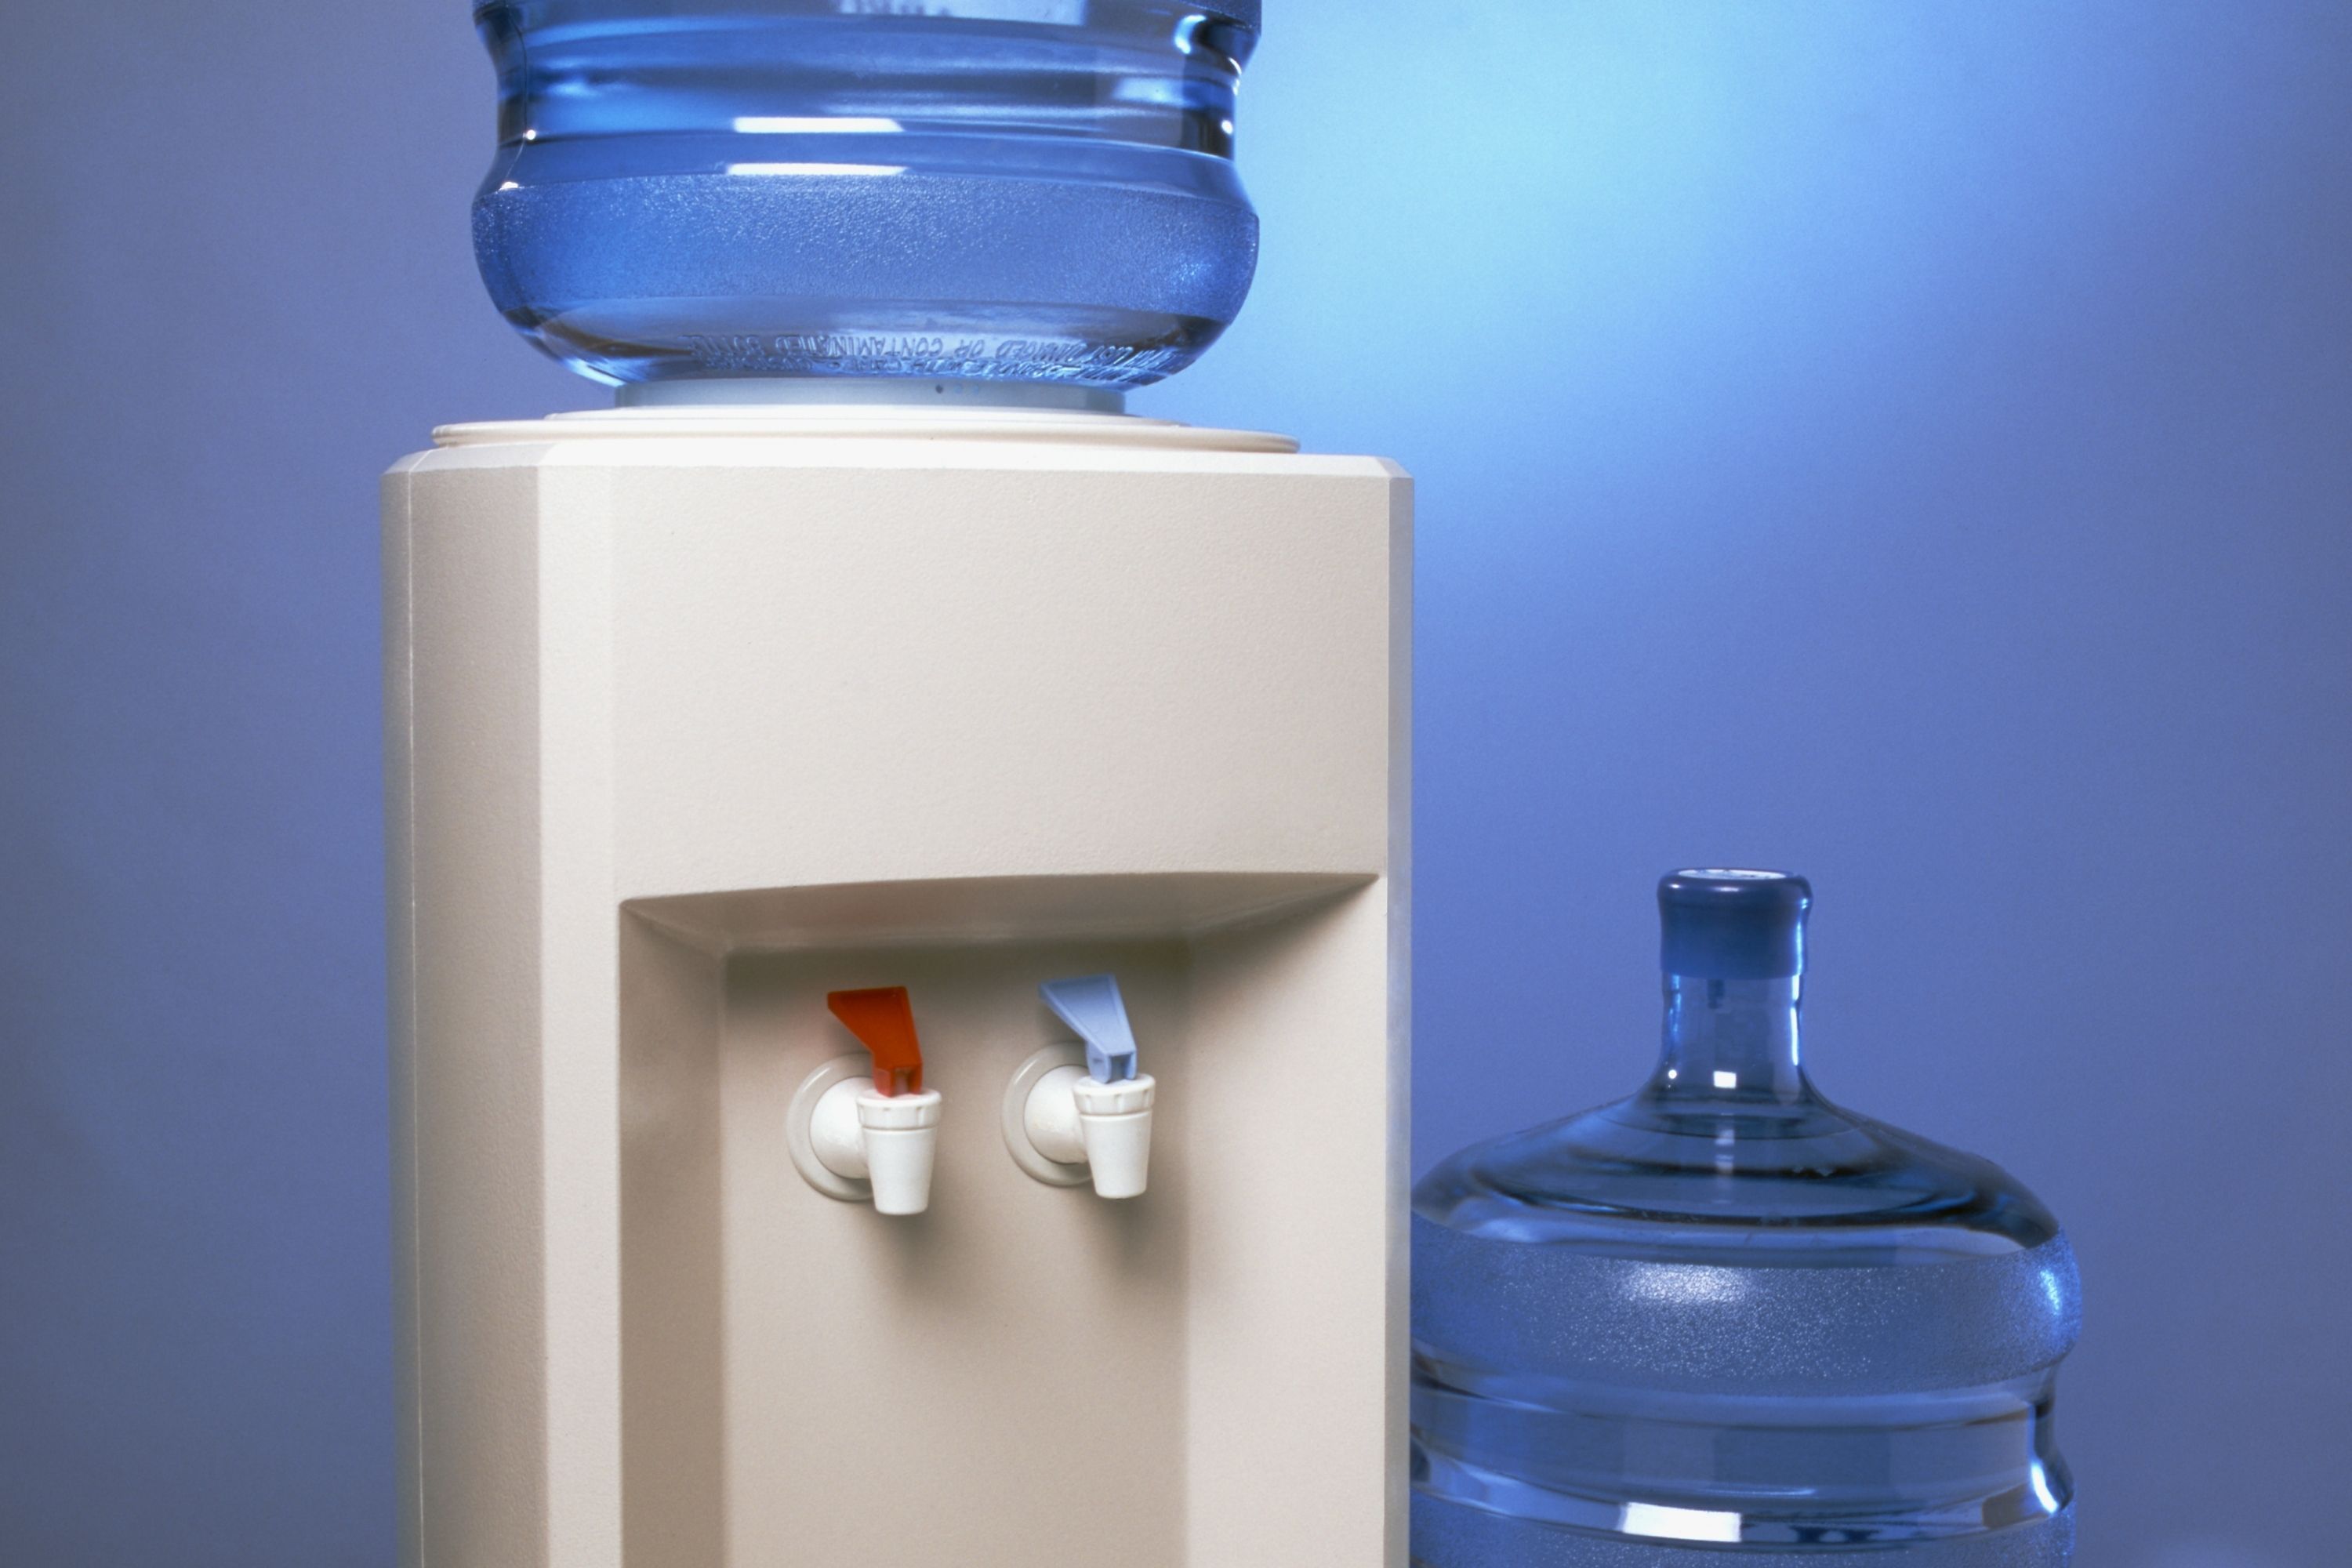 How to Remove a Full Water Bottle From a Water Cooler